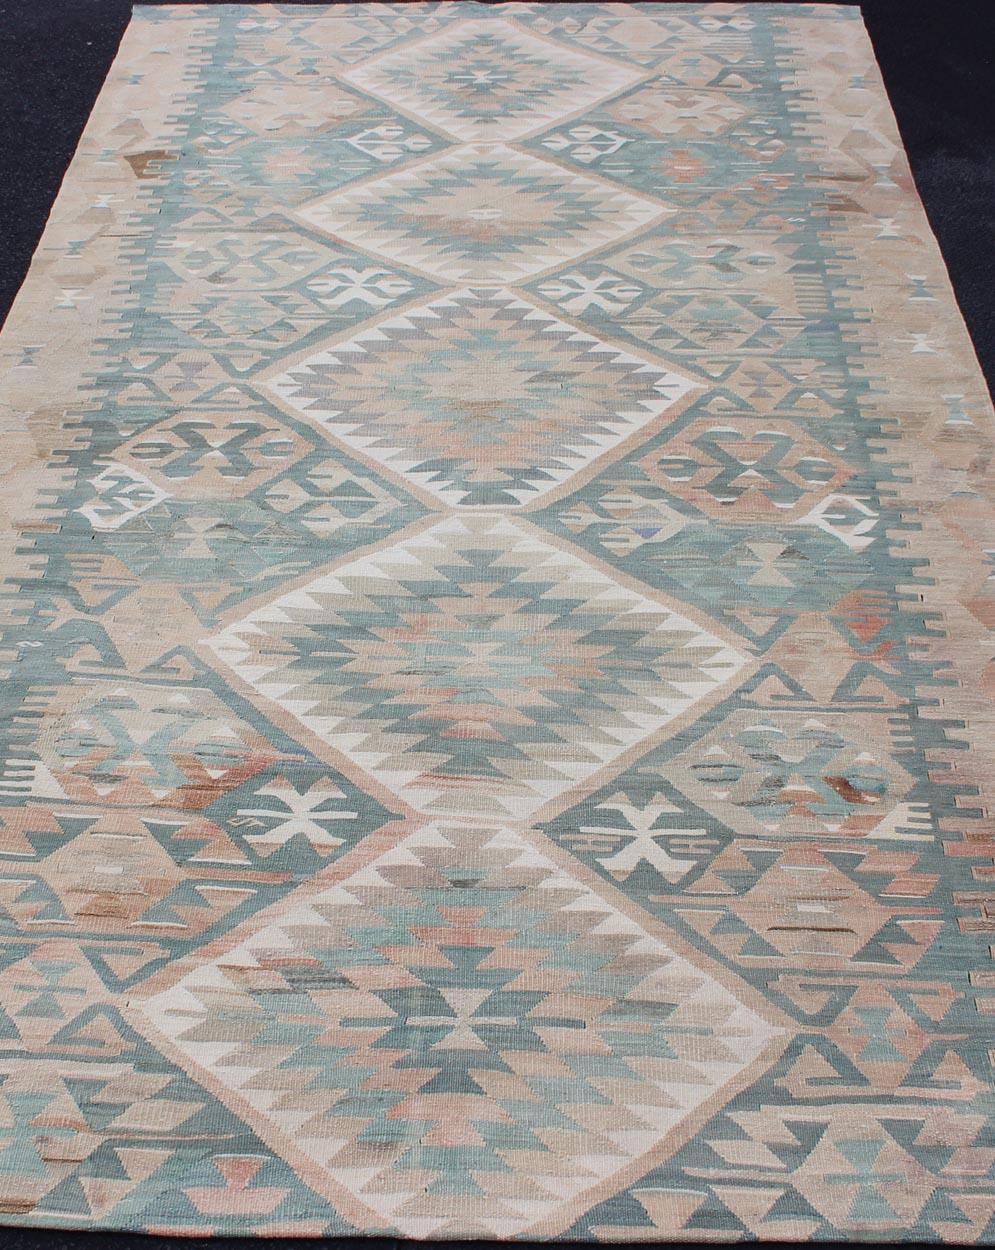 Wool Geometric Design Vintage Turkish Tribal Flat-Weave Rug in Teal and Neutrals For Sale